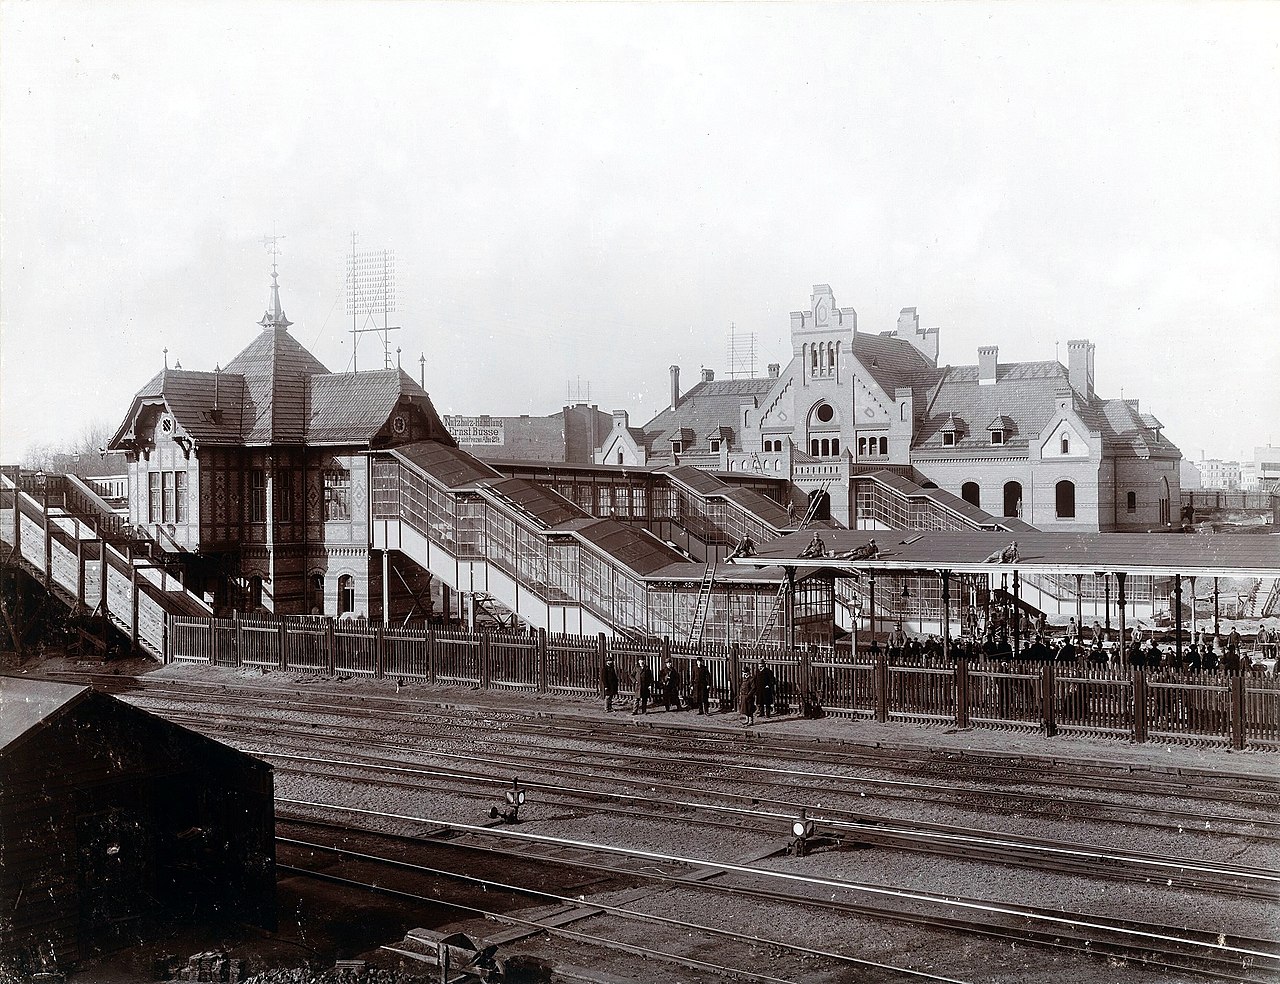 Historical photo of Gesundbrunnen station. From 1898, in black and white and lots of wood and ornate